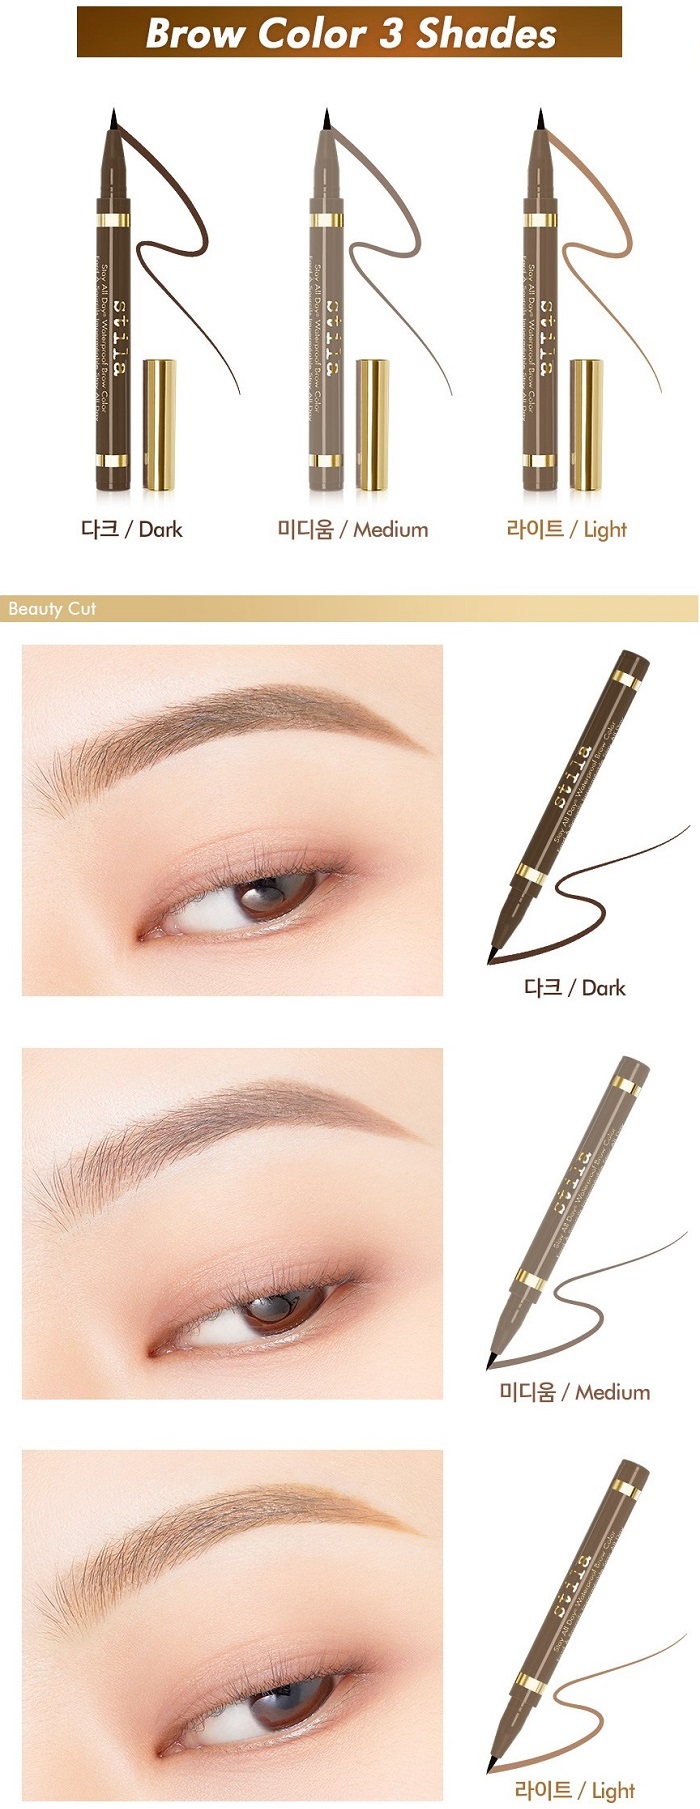 STILA Stay All Day Waterproof Brow Color